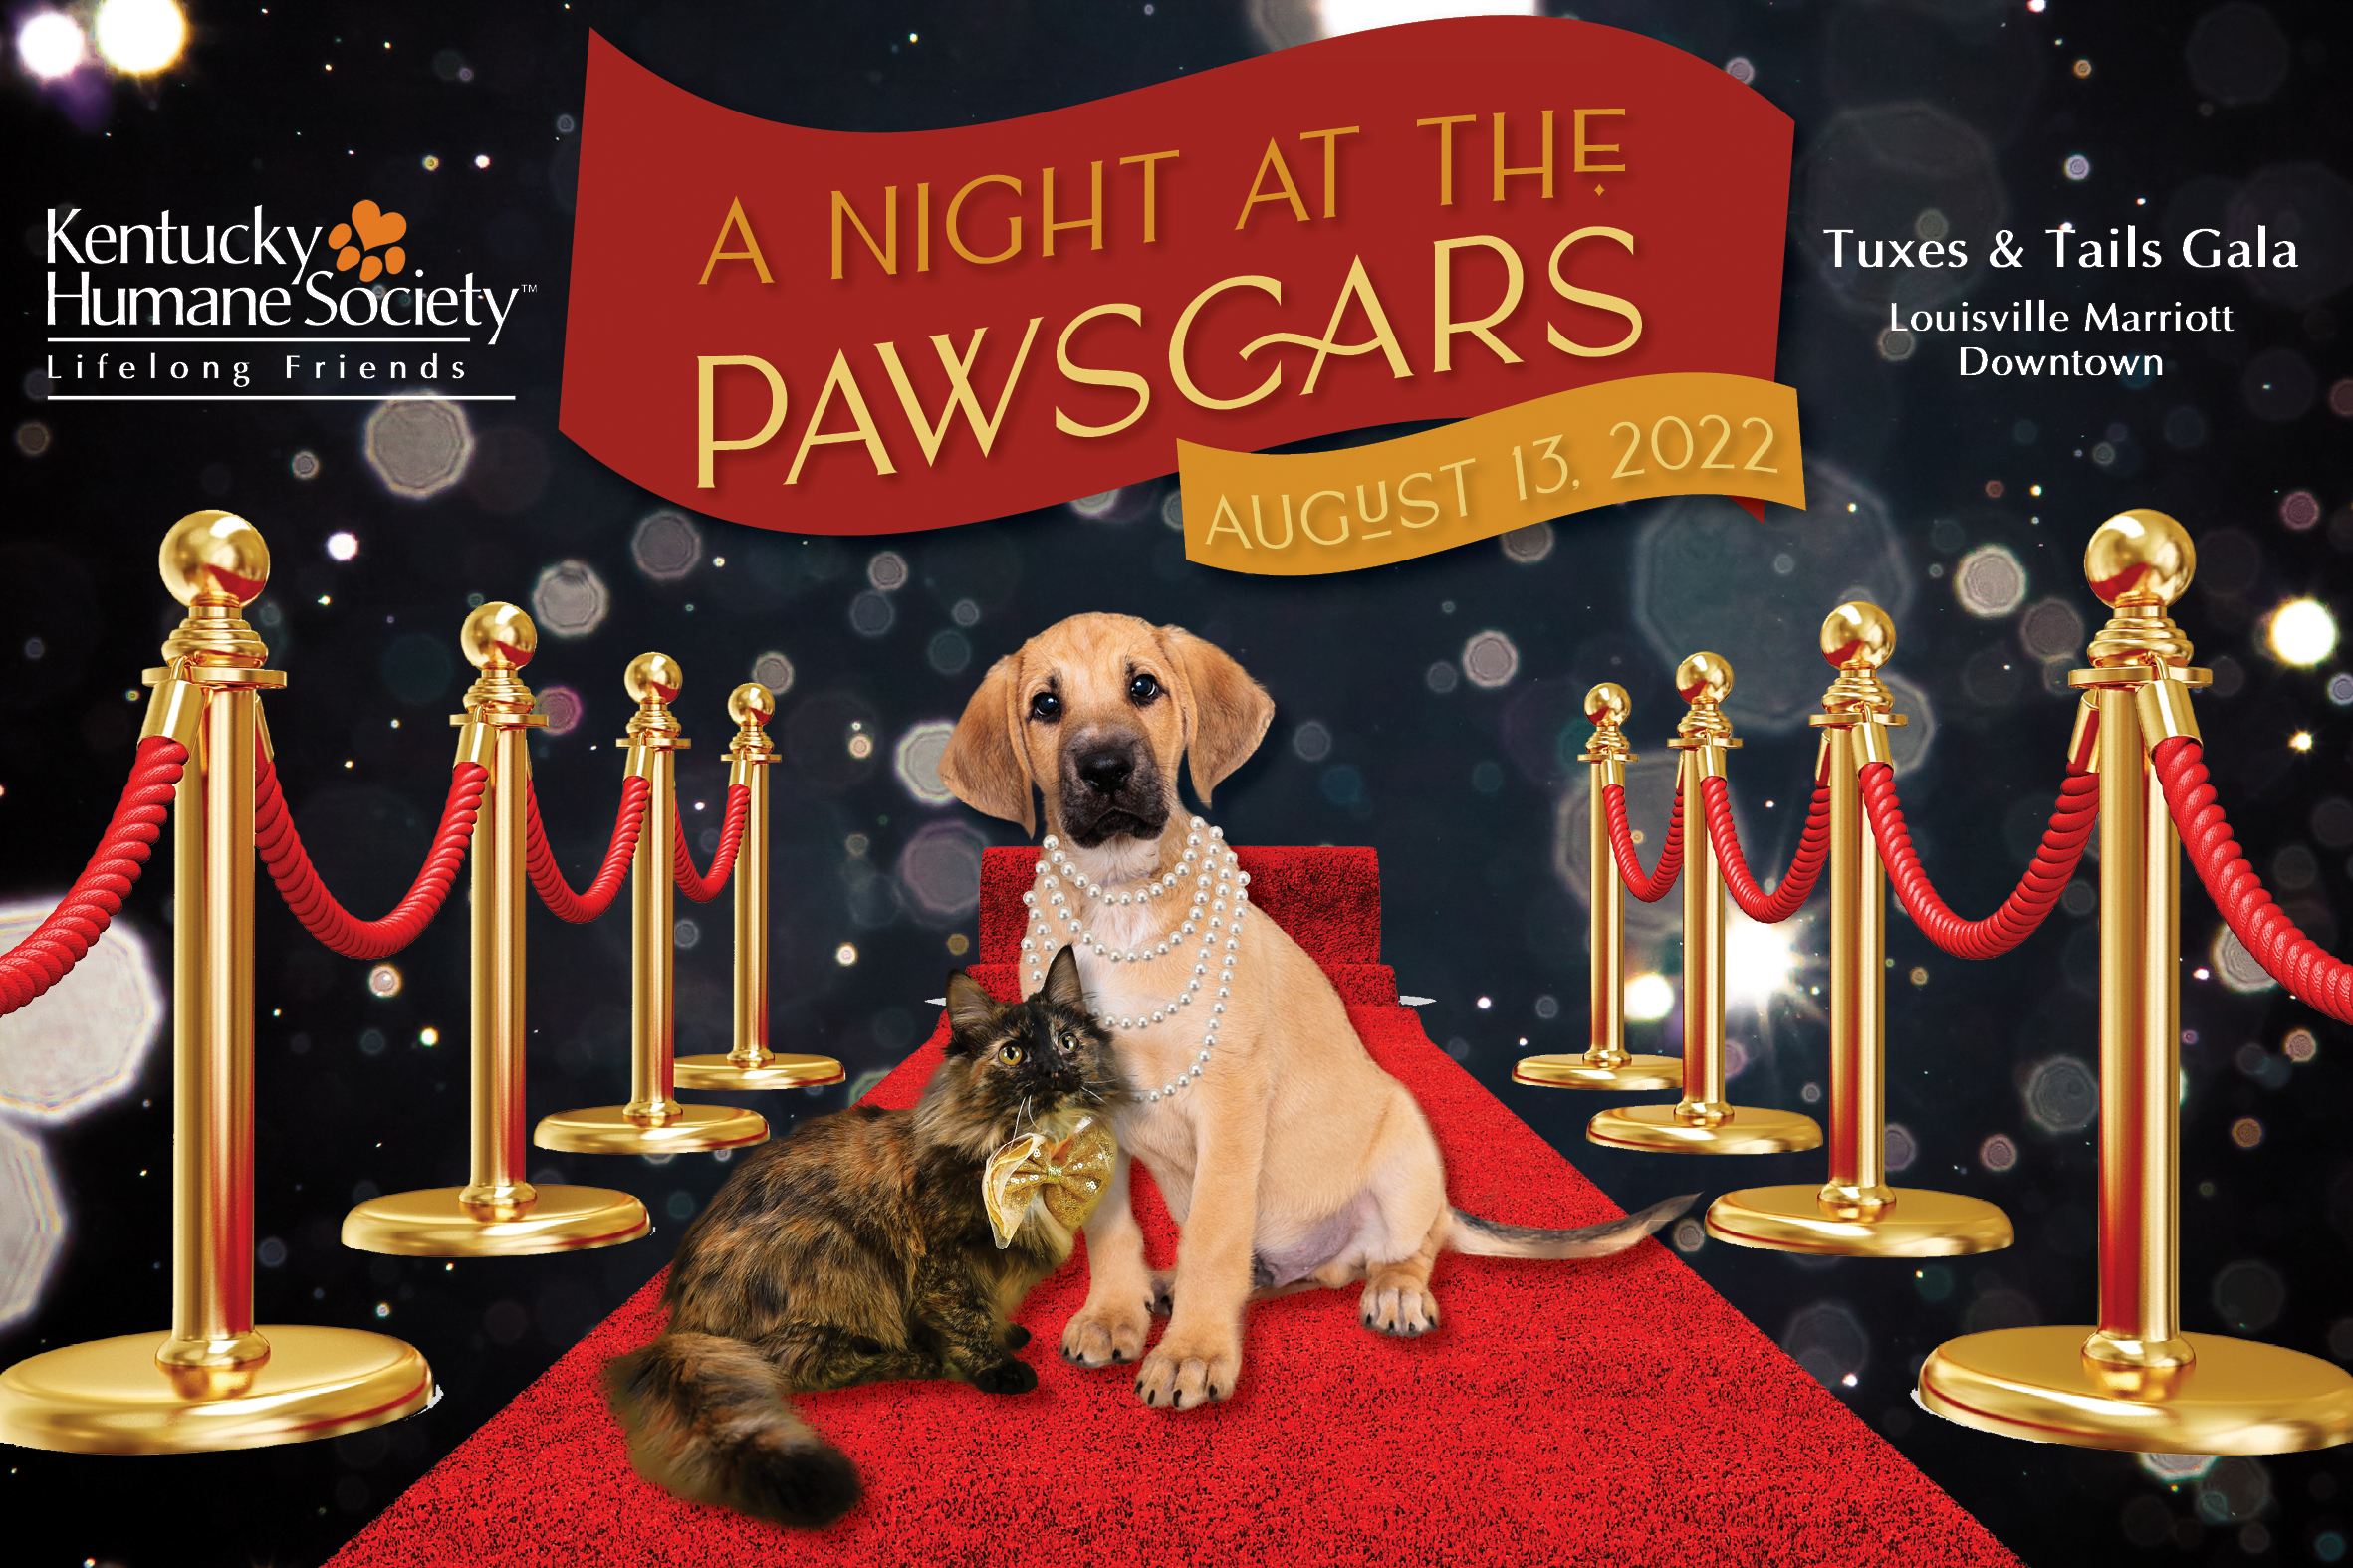 Tuxes & Tails Gala; A Night at the Pawscars!